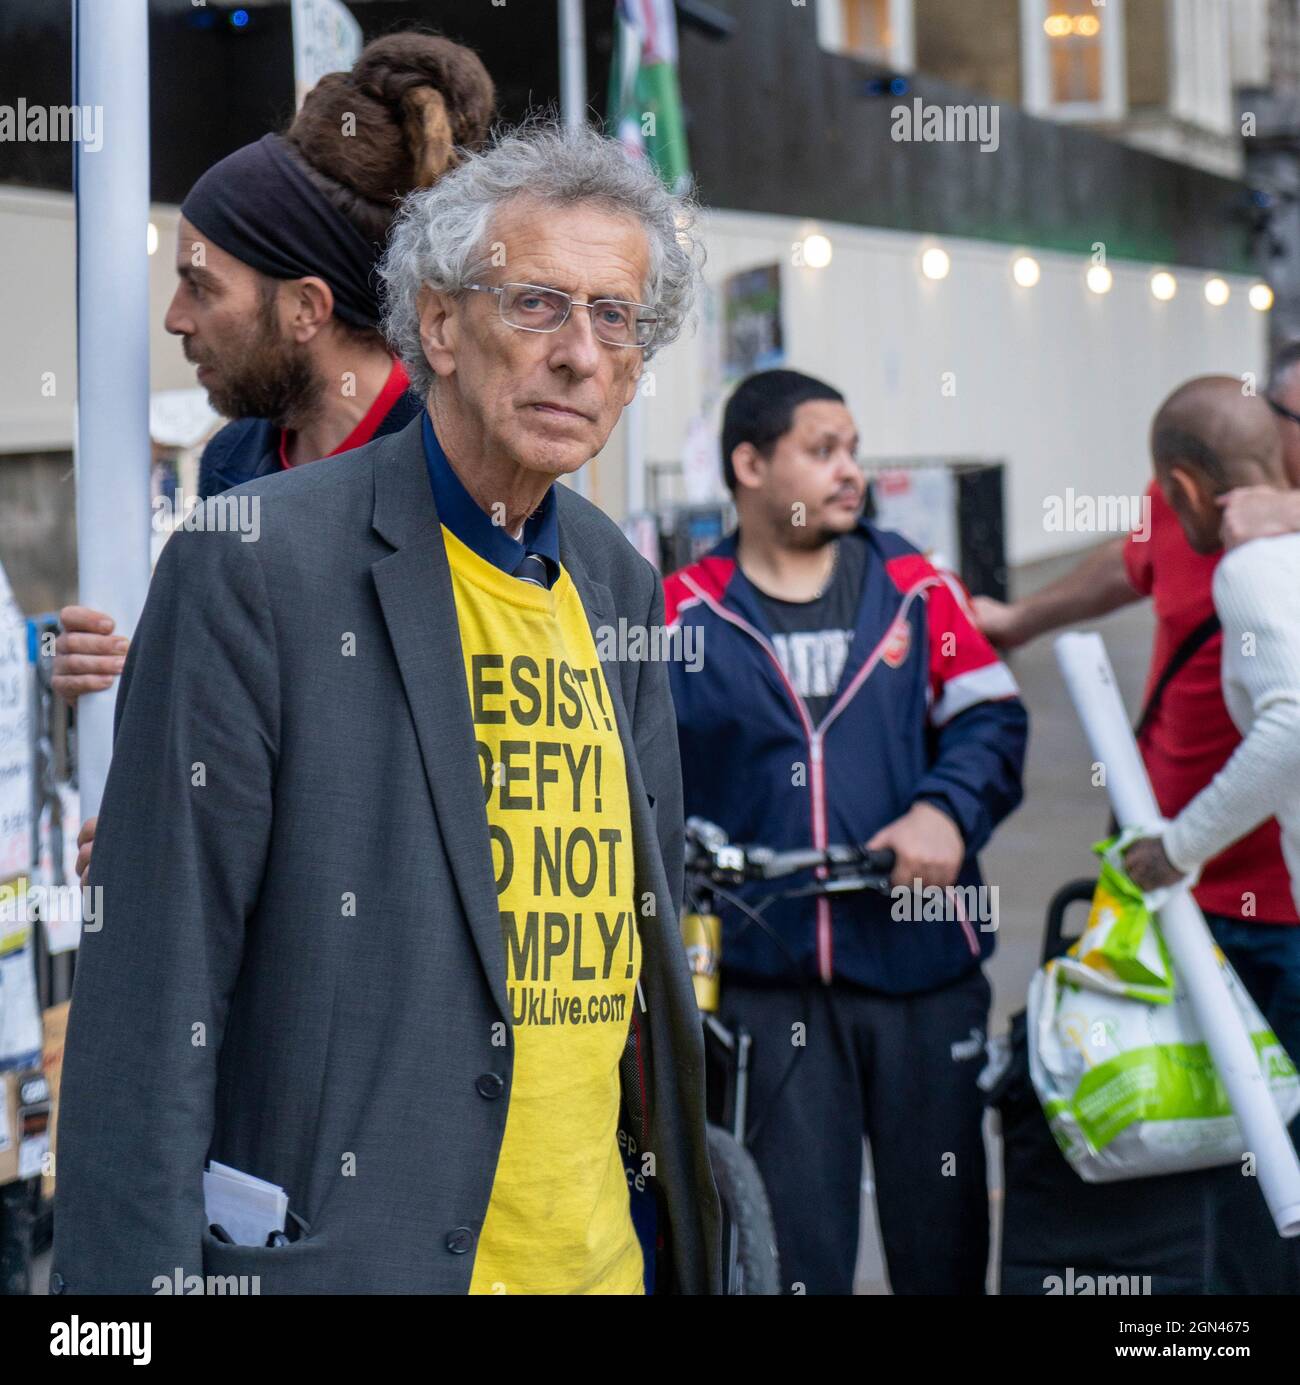 Piers Corbyn, the brother of former Labour Party leader, Jeremy Corbyn, attends an anti-vaccination, anti-lockdown protest outside Downing Street.Anti-vaccination and anti-lockdown protesters demonstrate outside Downing Street as the Prime Minister Boris Johnson carries out a reshuffle of his Cabinet. Stock Photo